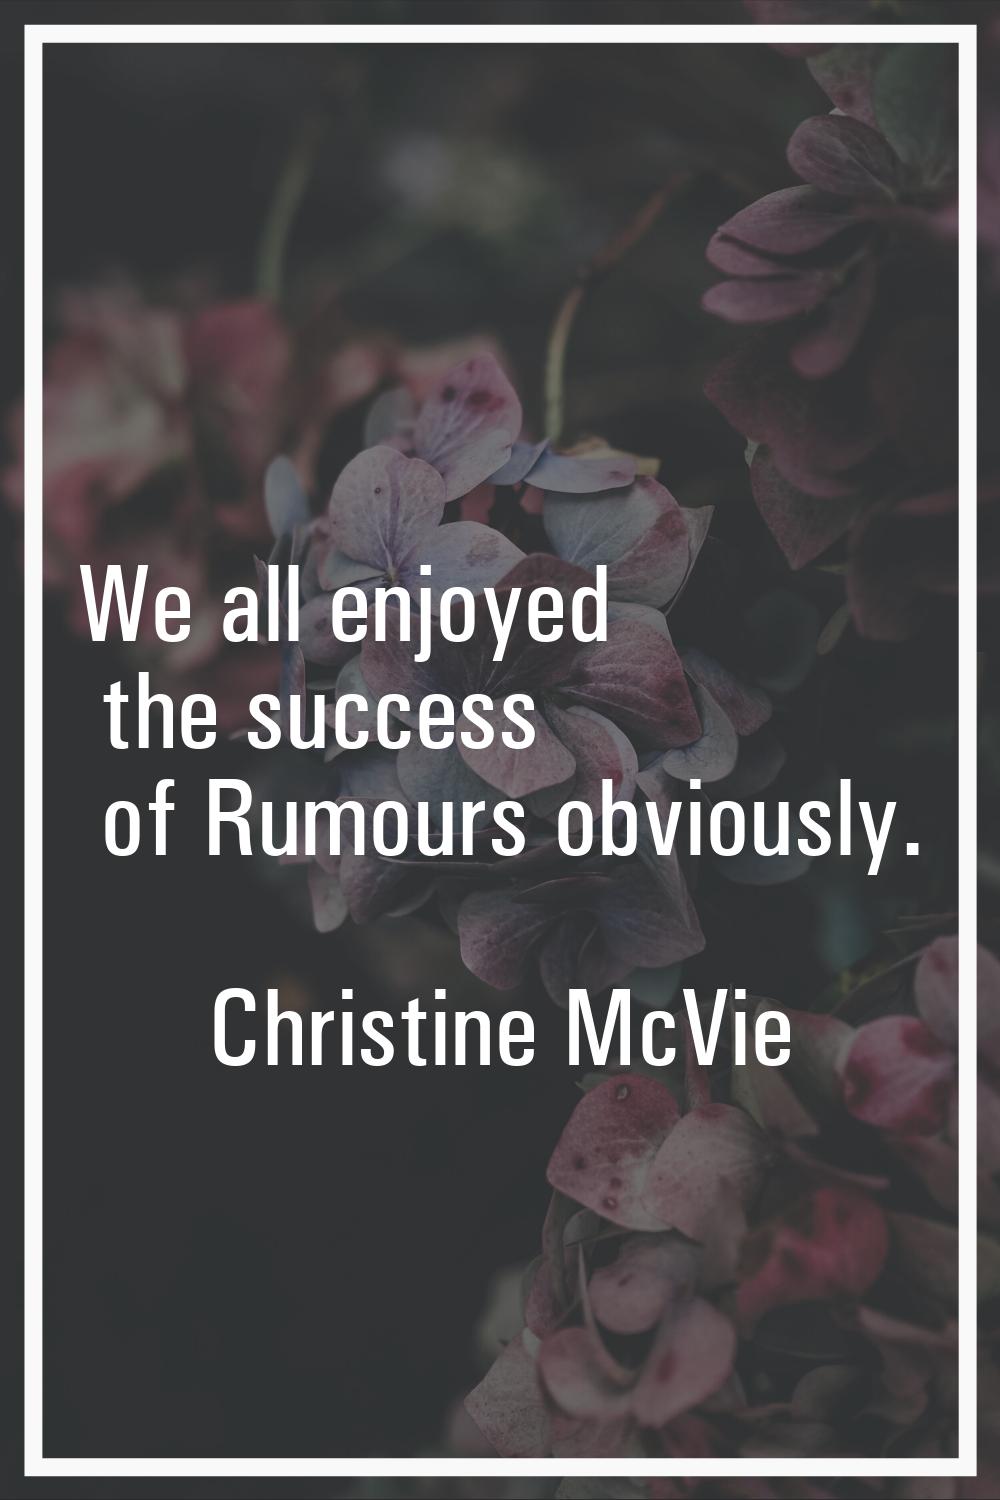 We all enjoyed the success of Rumours obviously.